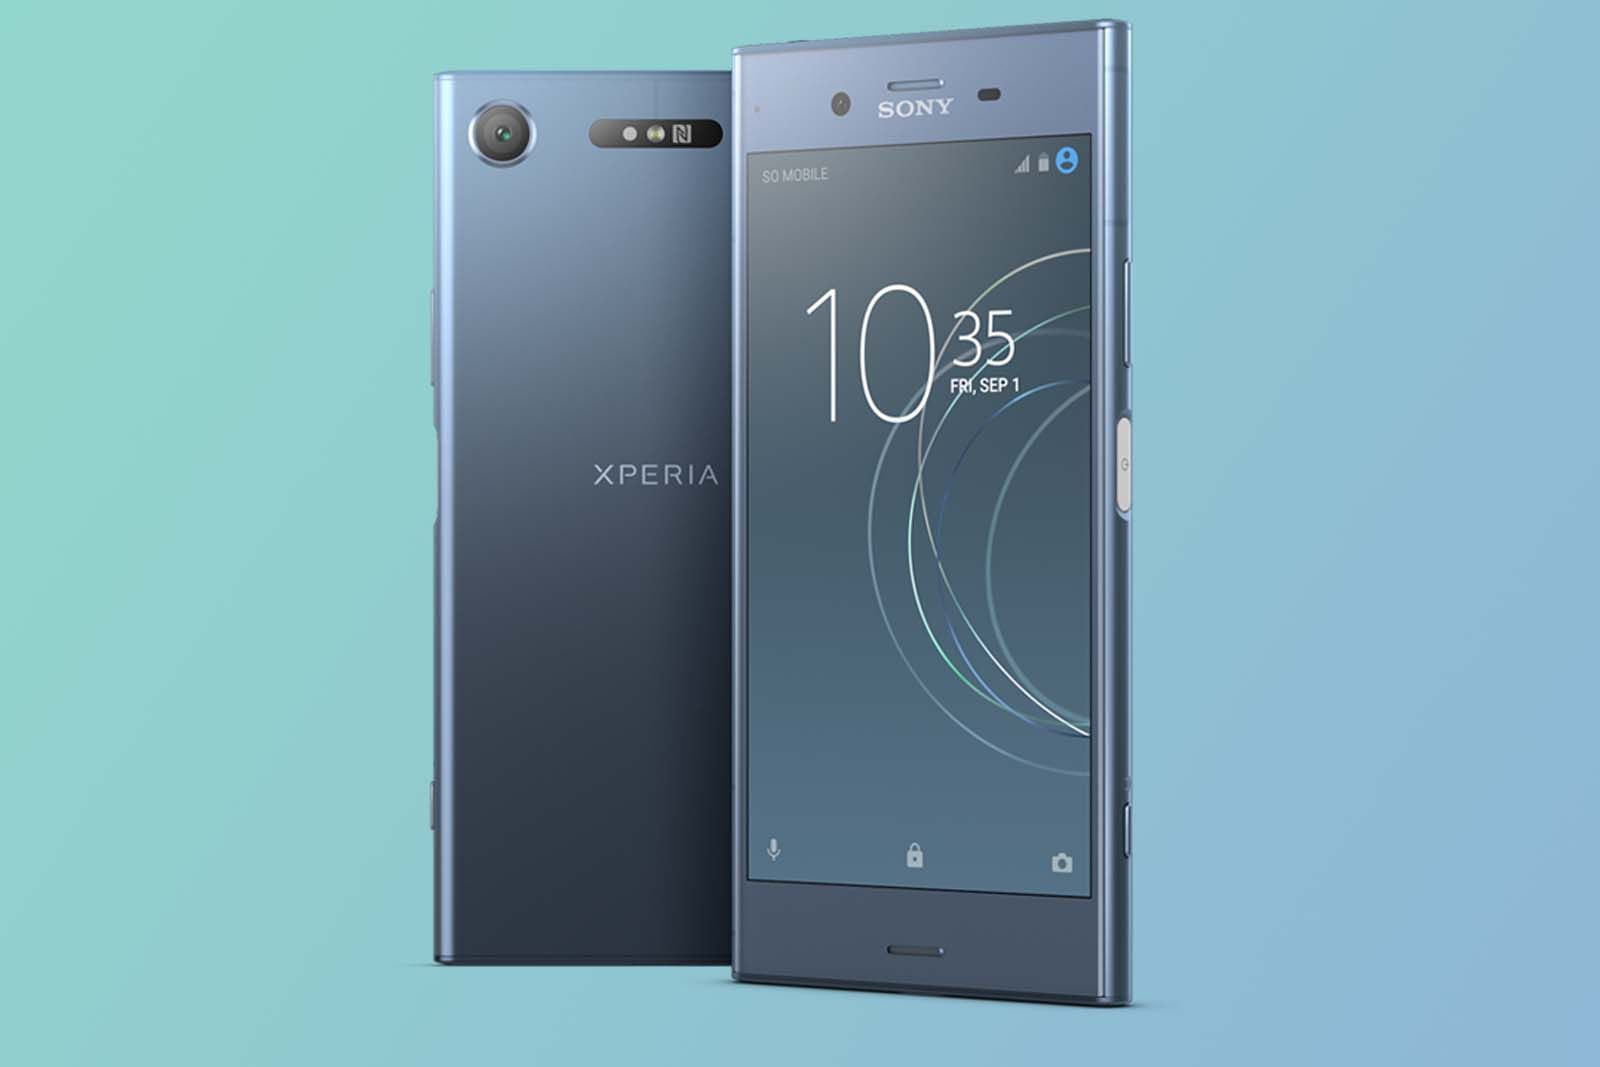 Sony Xperia Xz1 And Xz1 Compact Release Date Specs And Everything You Need To Know image 2